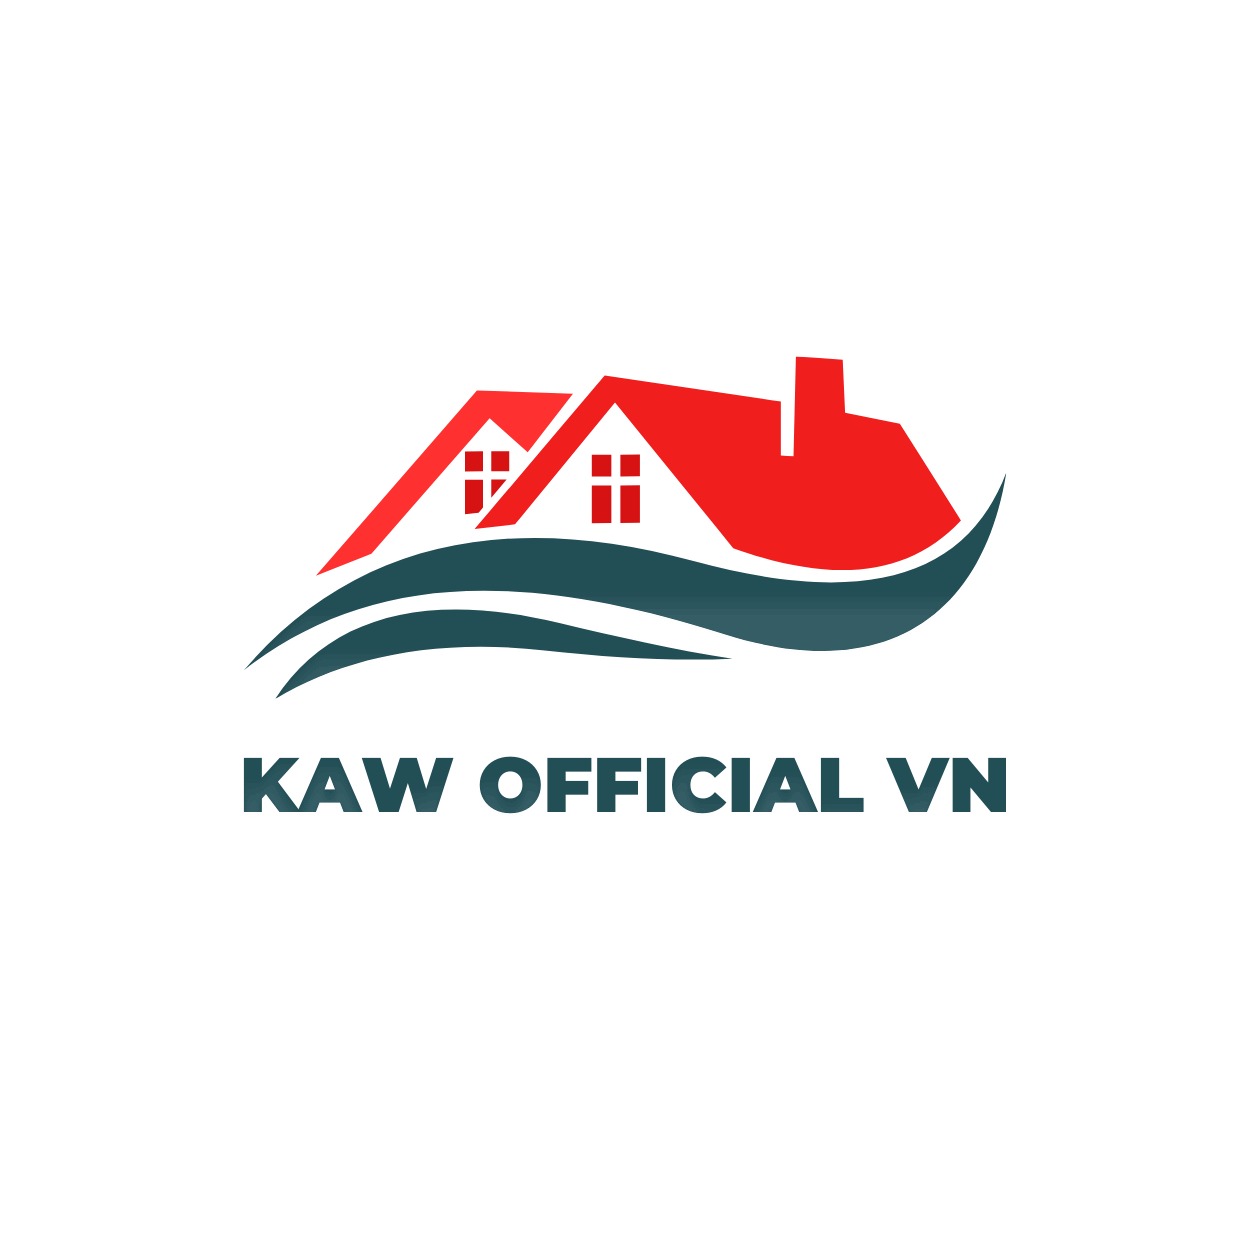 KAW OFFICIAL VN